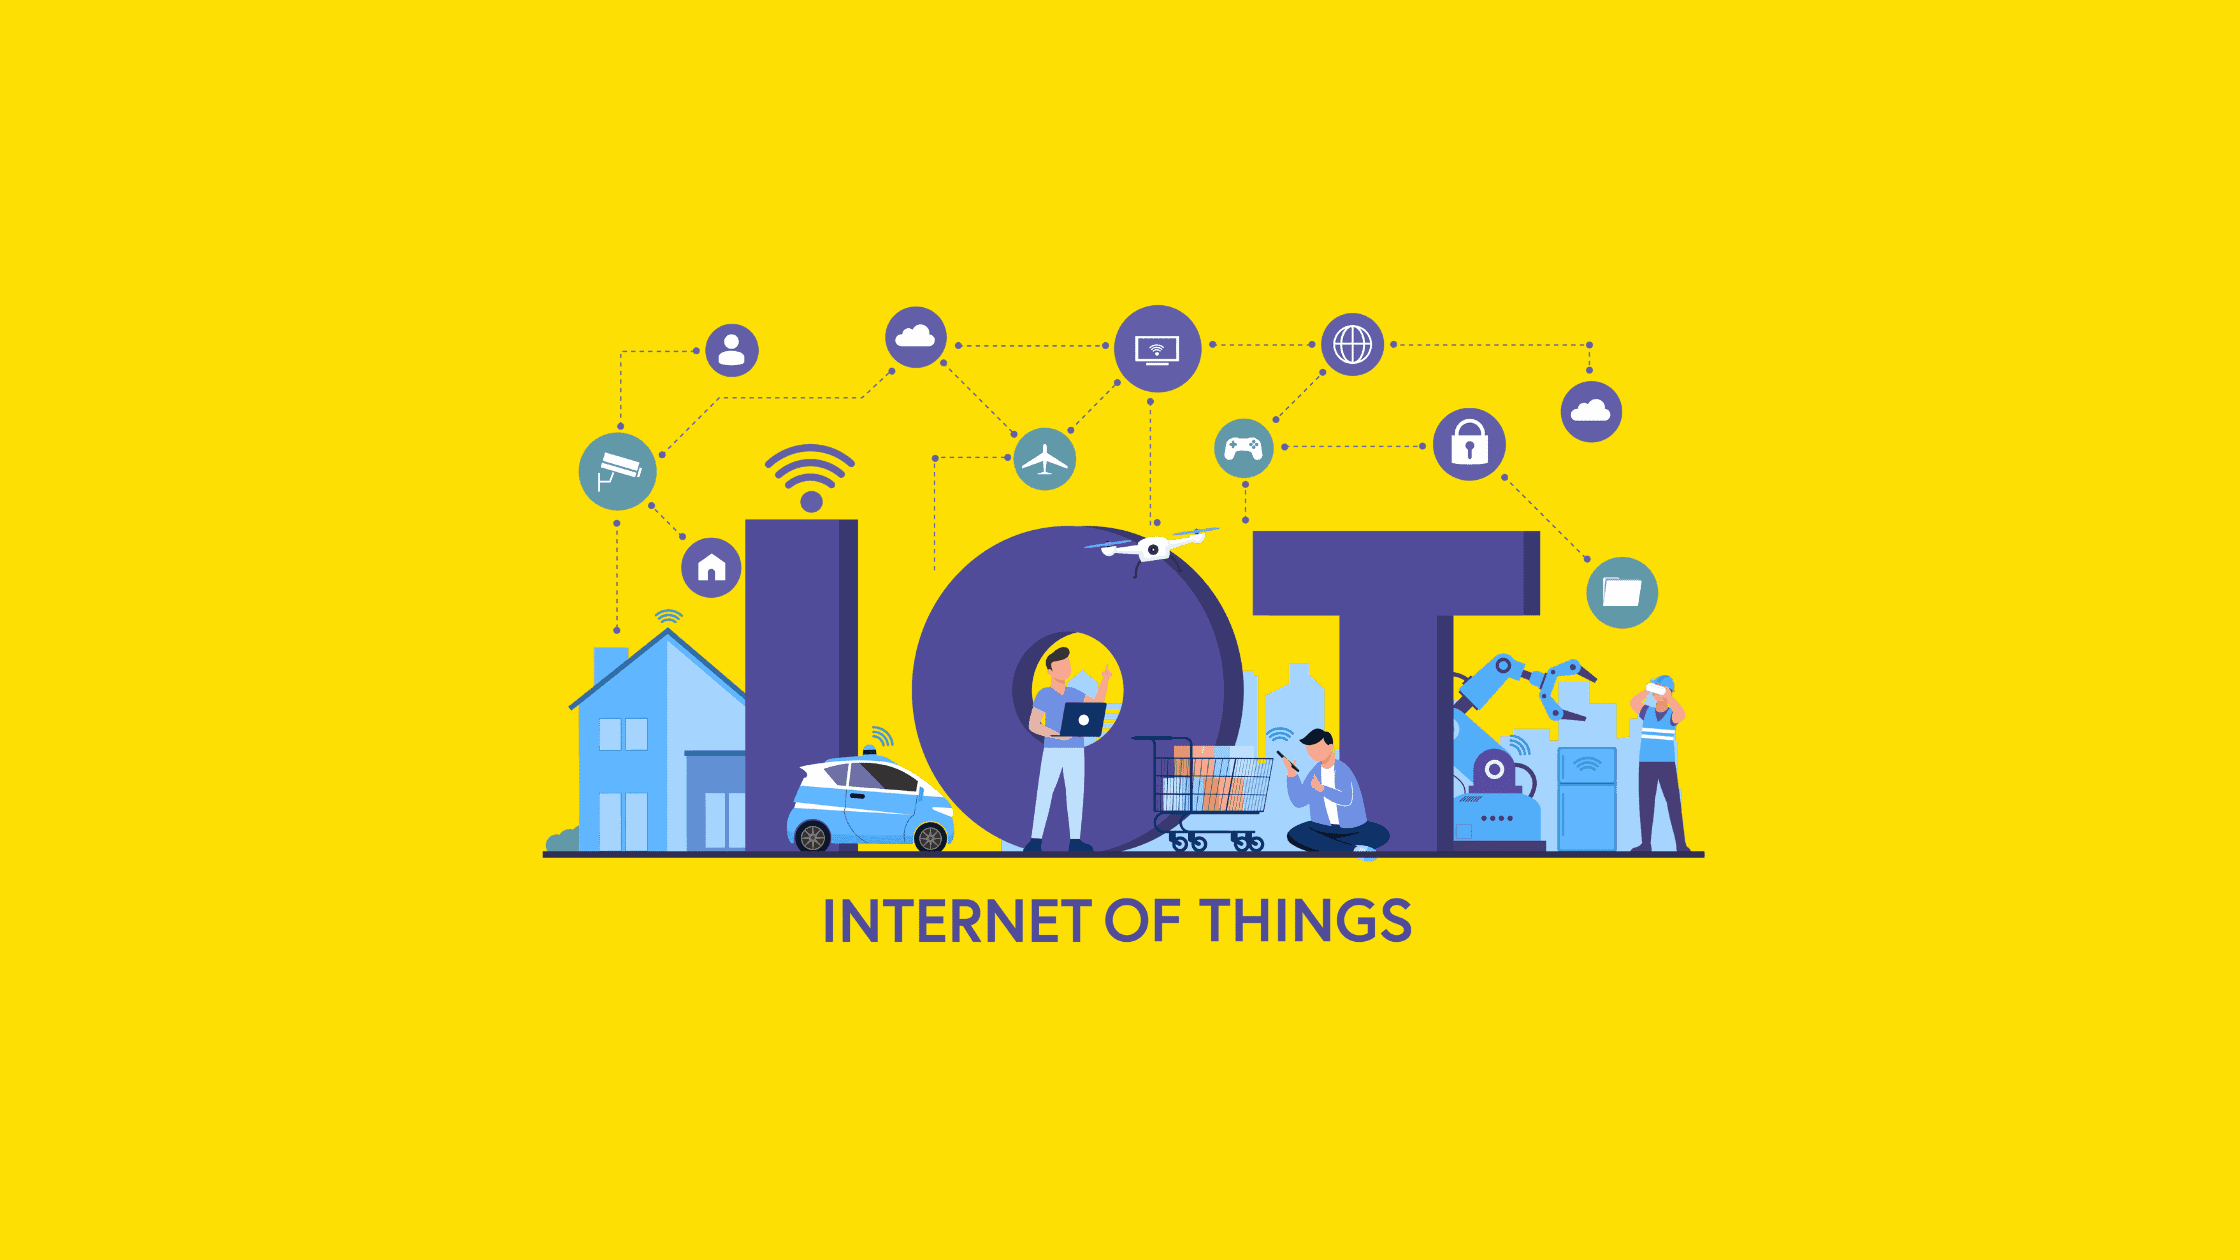 5 Open Source And Tools To Audit The Security Of Iot Devices